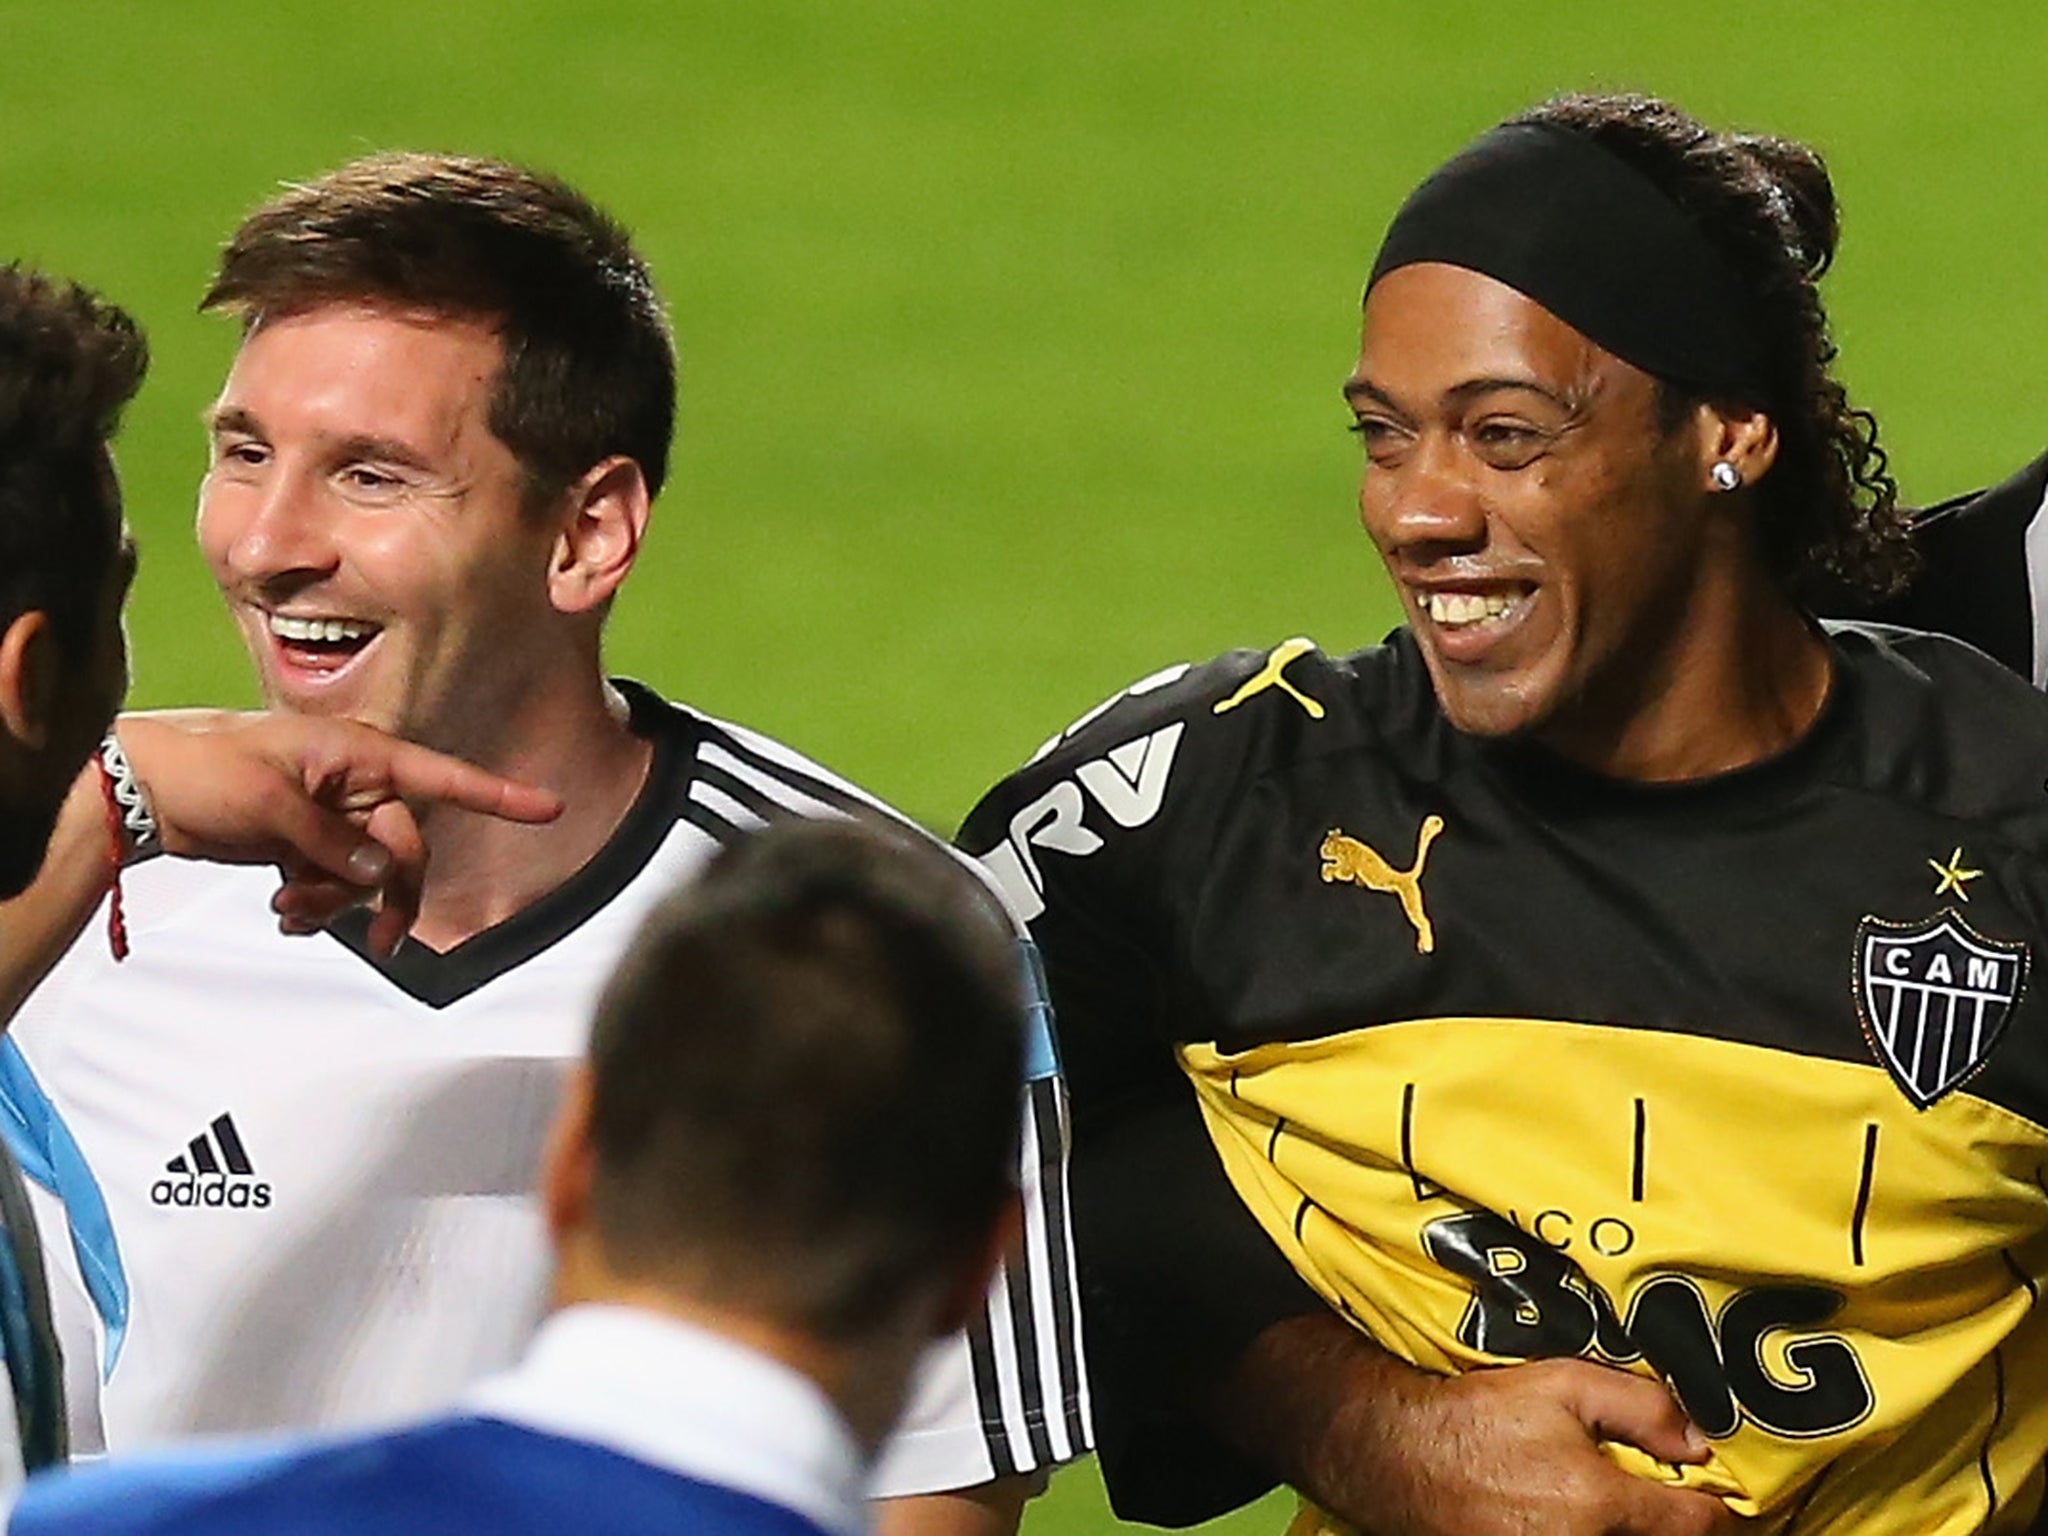 Lionel Messi is duped by a Ronaldinho lookalike